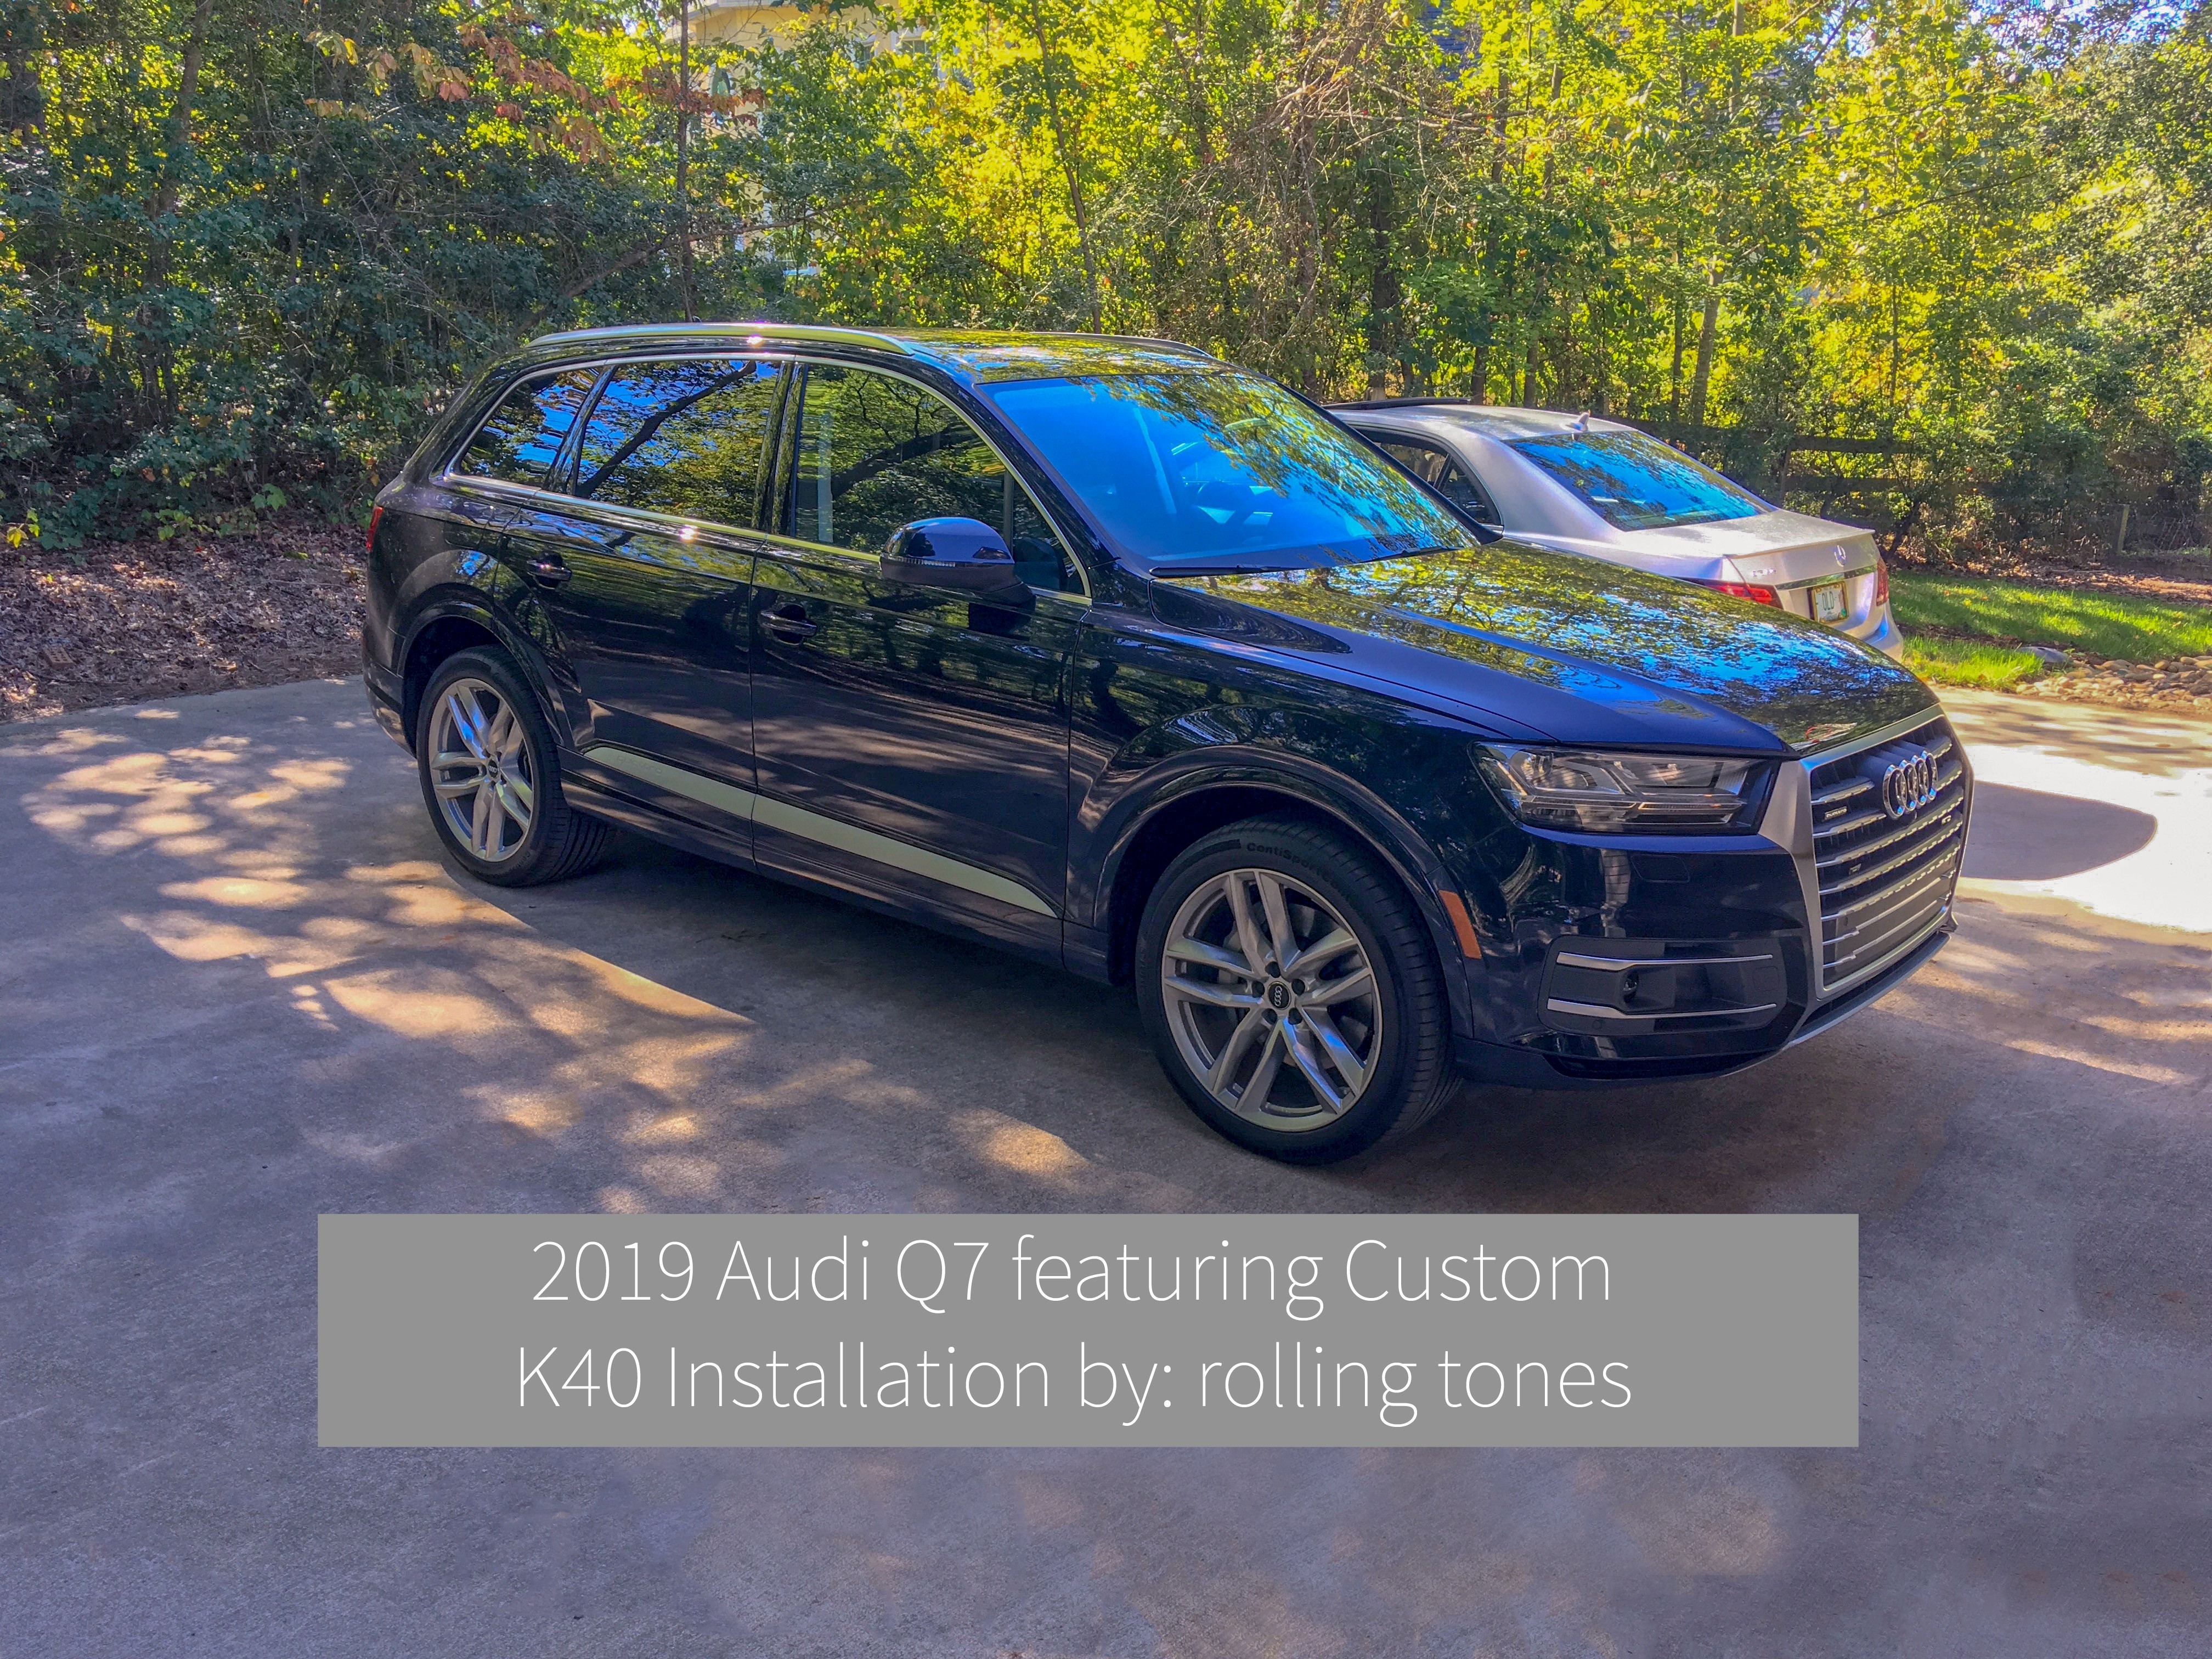 Custom K40 Police Laser Jammers and Hidden Radar Receiver Profile Installed on 2019 Audi Q7 in Charlotte, NC